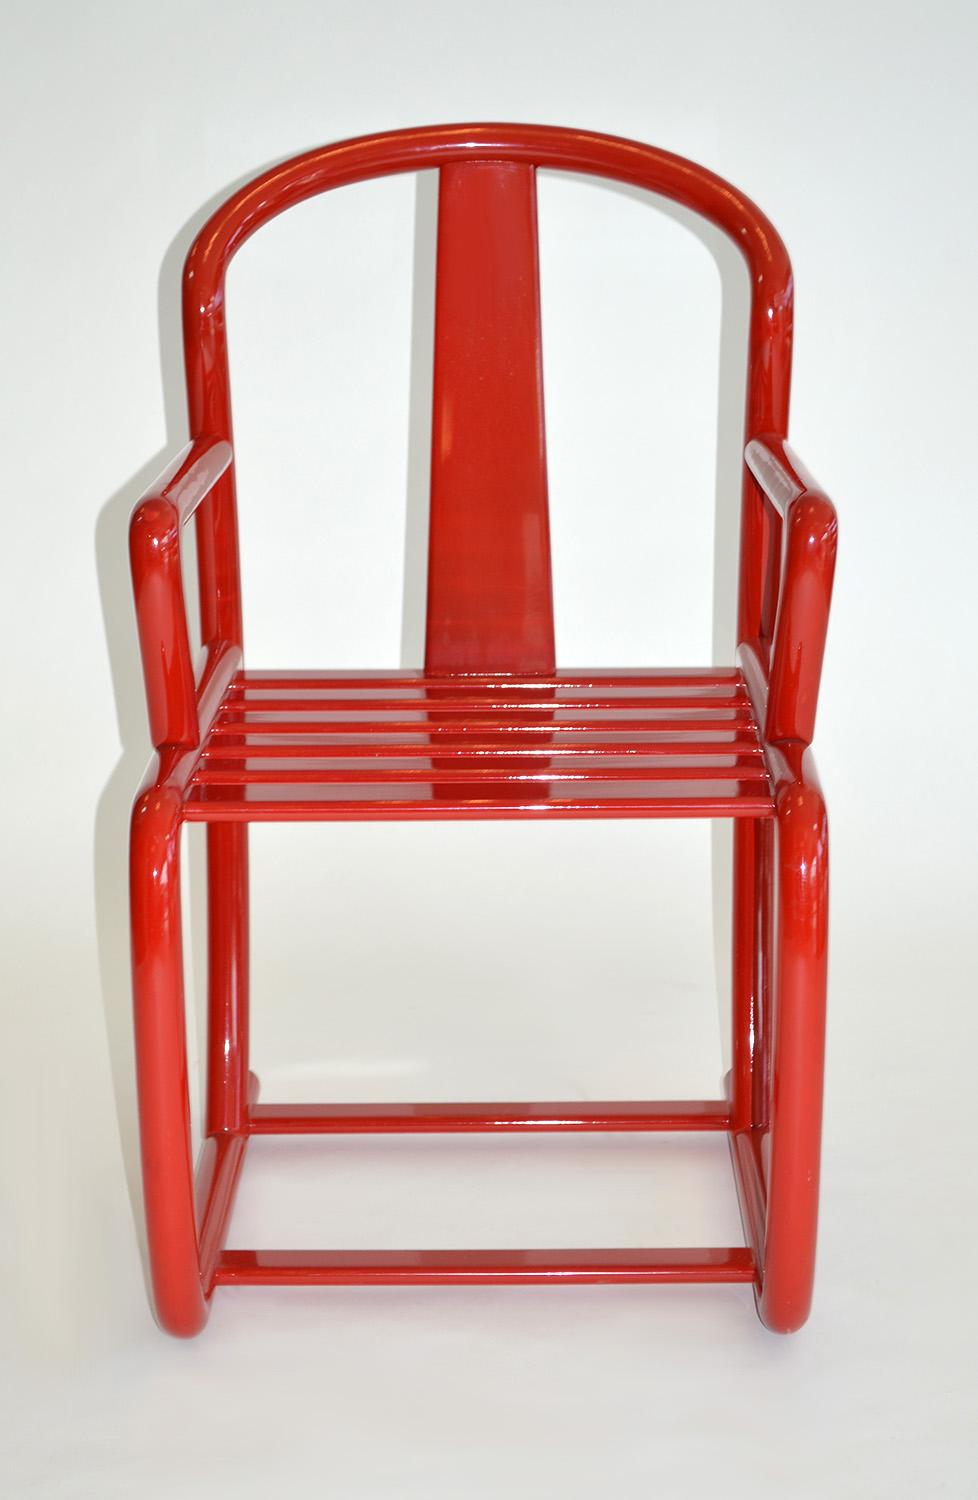 Set of four modern dining chairs in red lacquer, Italy, 1980s. 
High-style, cantilevered glossy tomato-red lacquer wood chairs / armchairs / dining chairs by Tecnosedia, Italy. Seat height 17